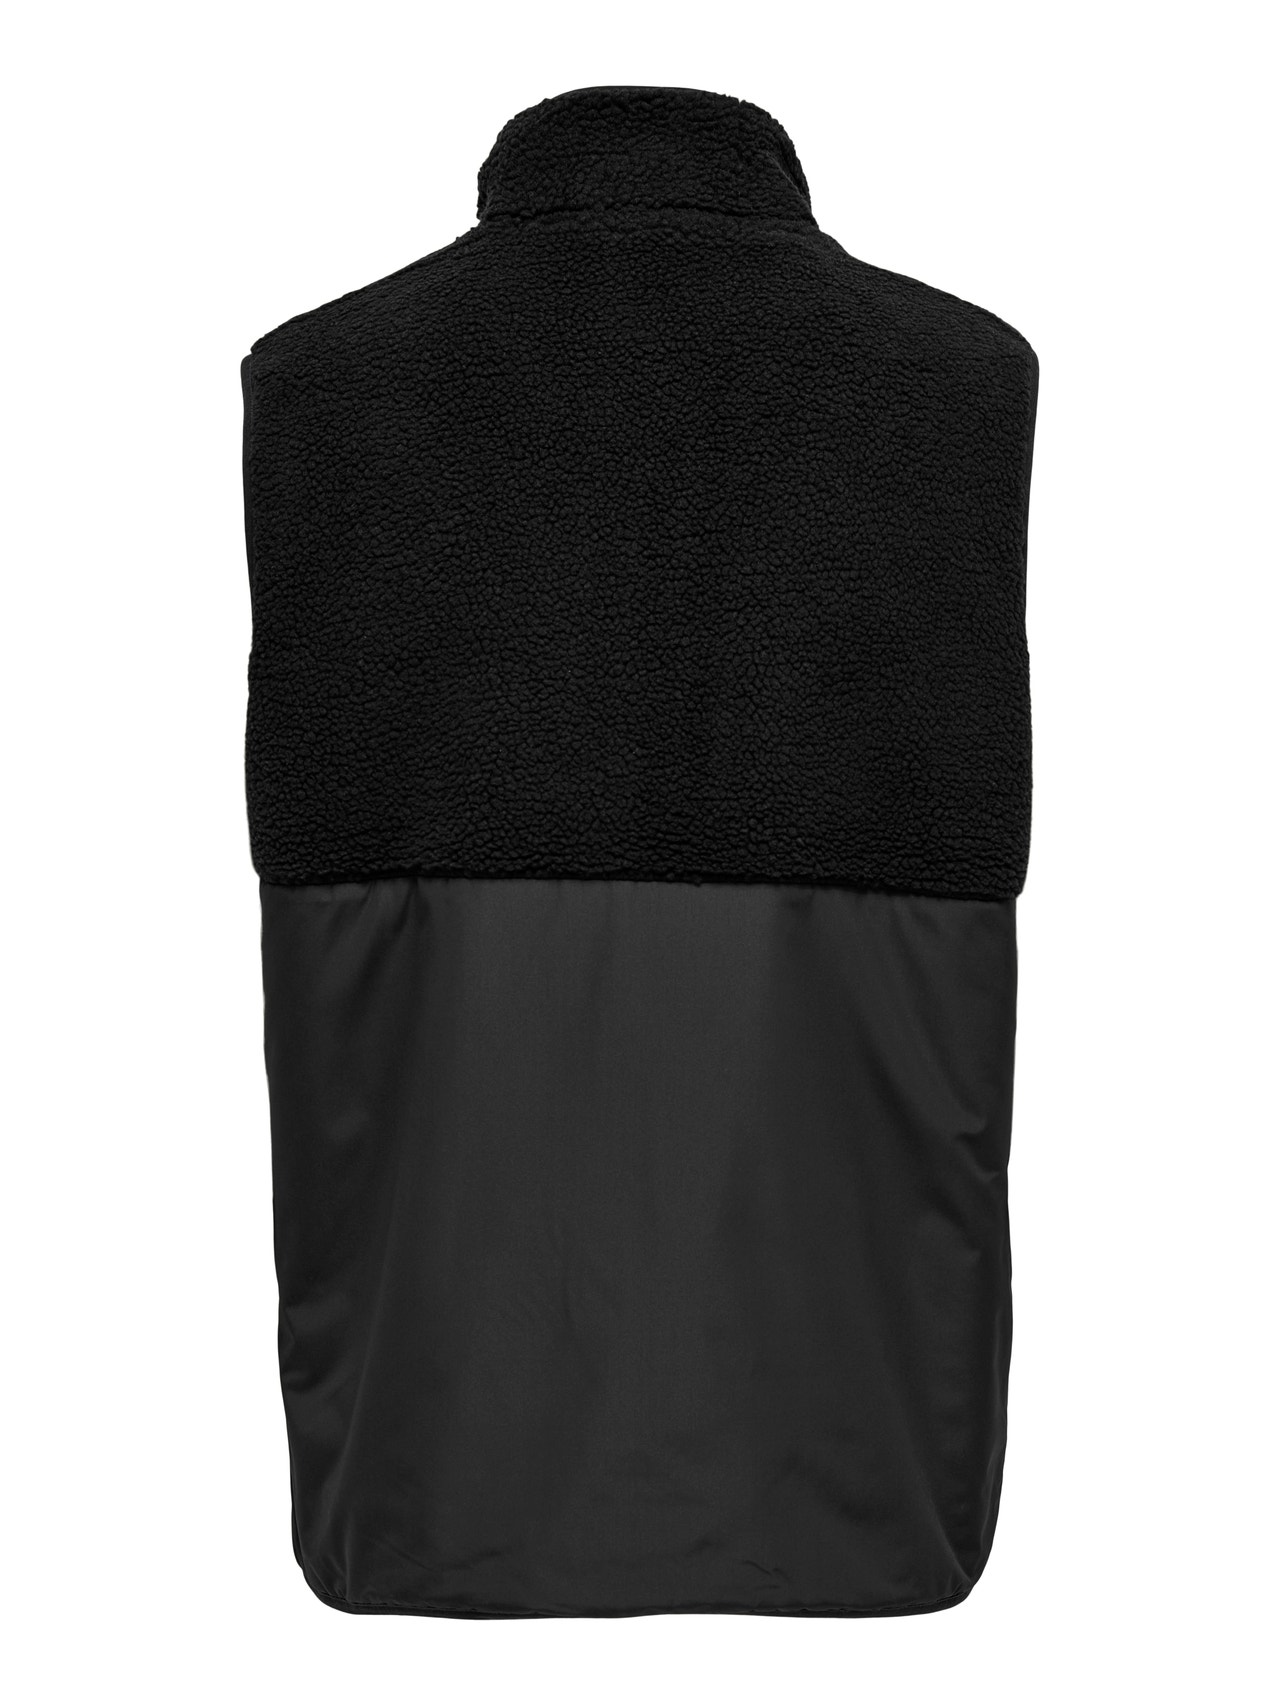 ONLY & SONS Gilets anti-froid -Black - 22022513